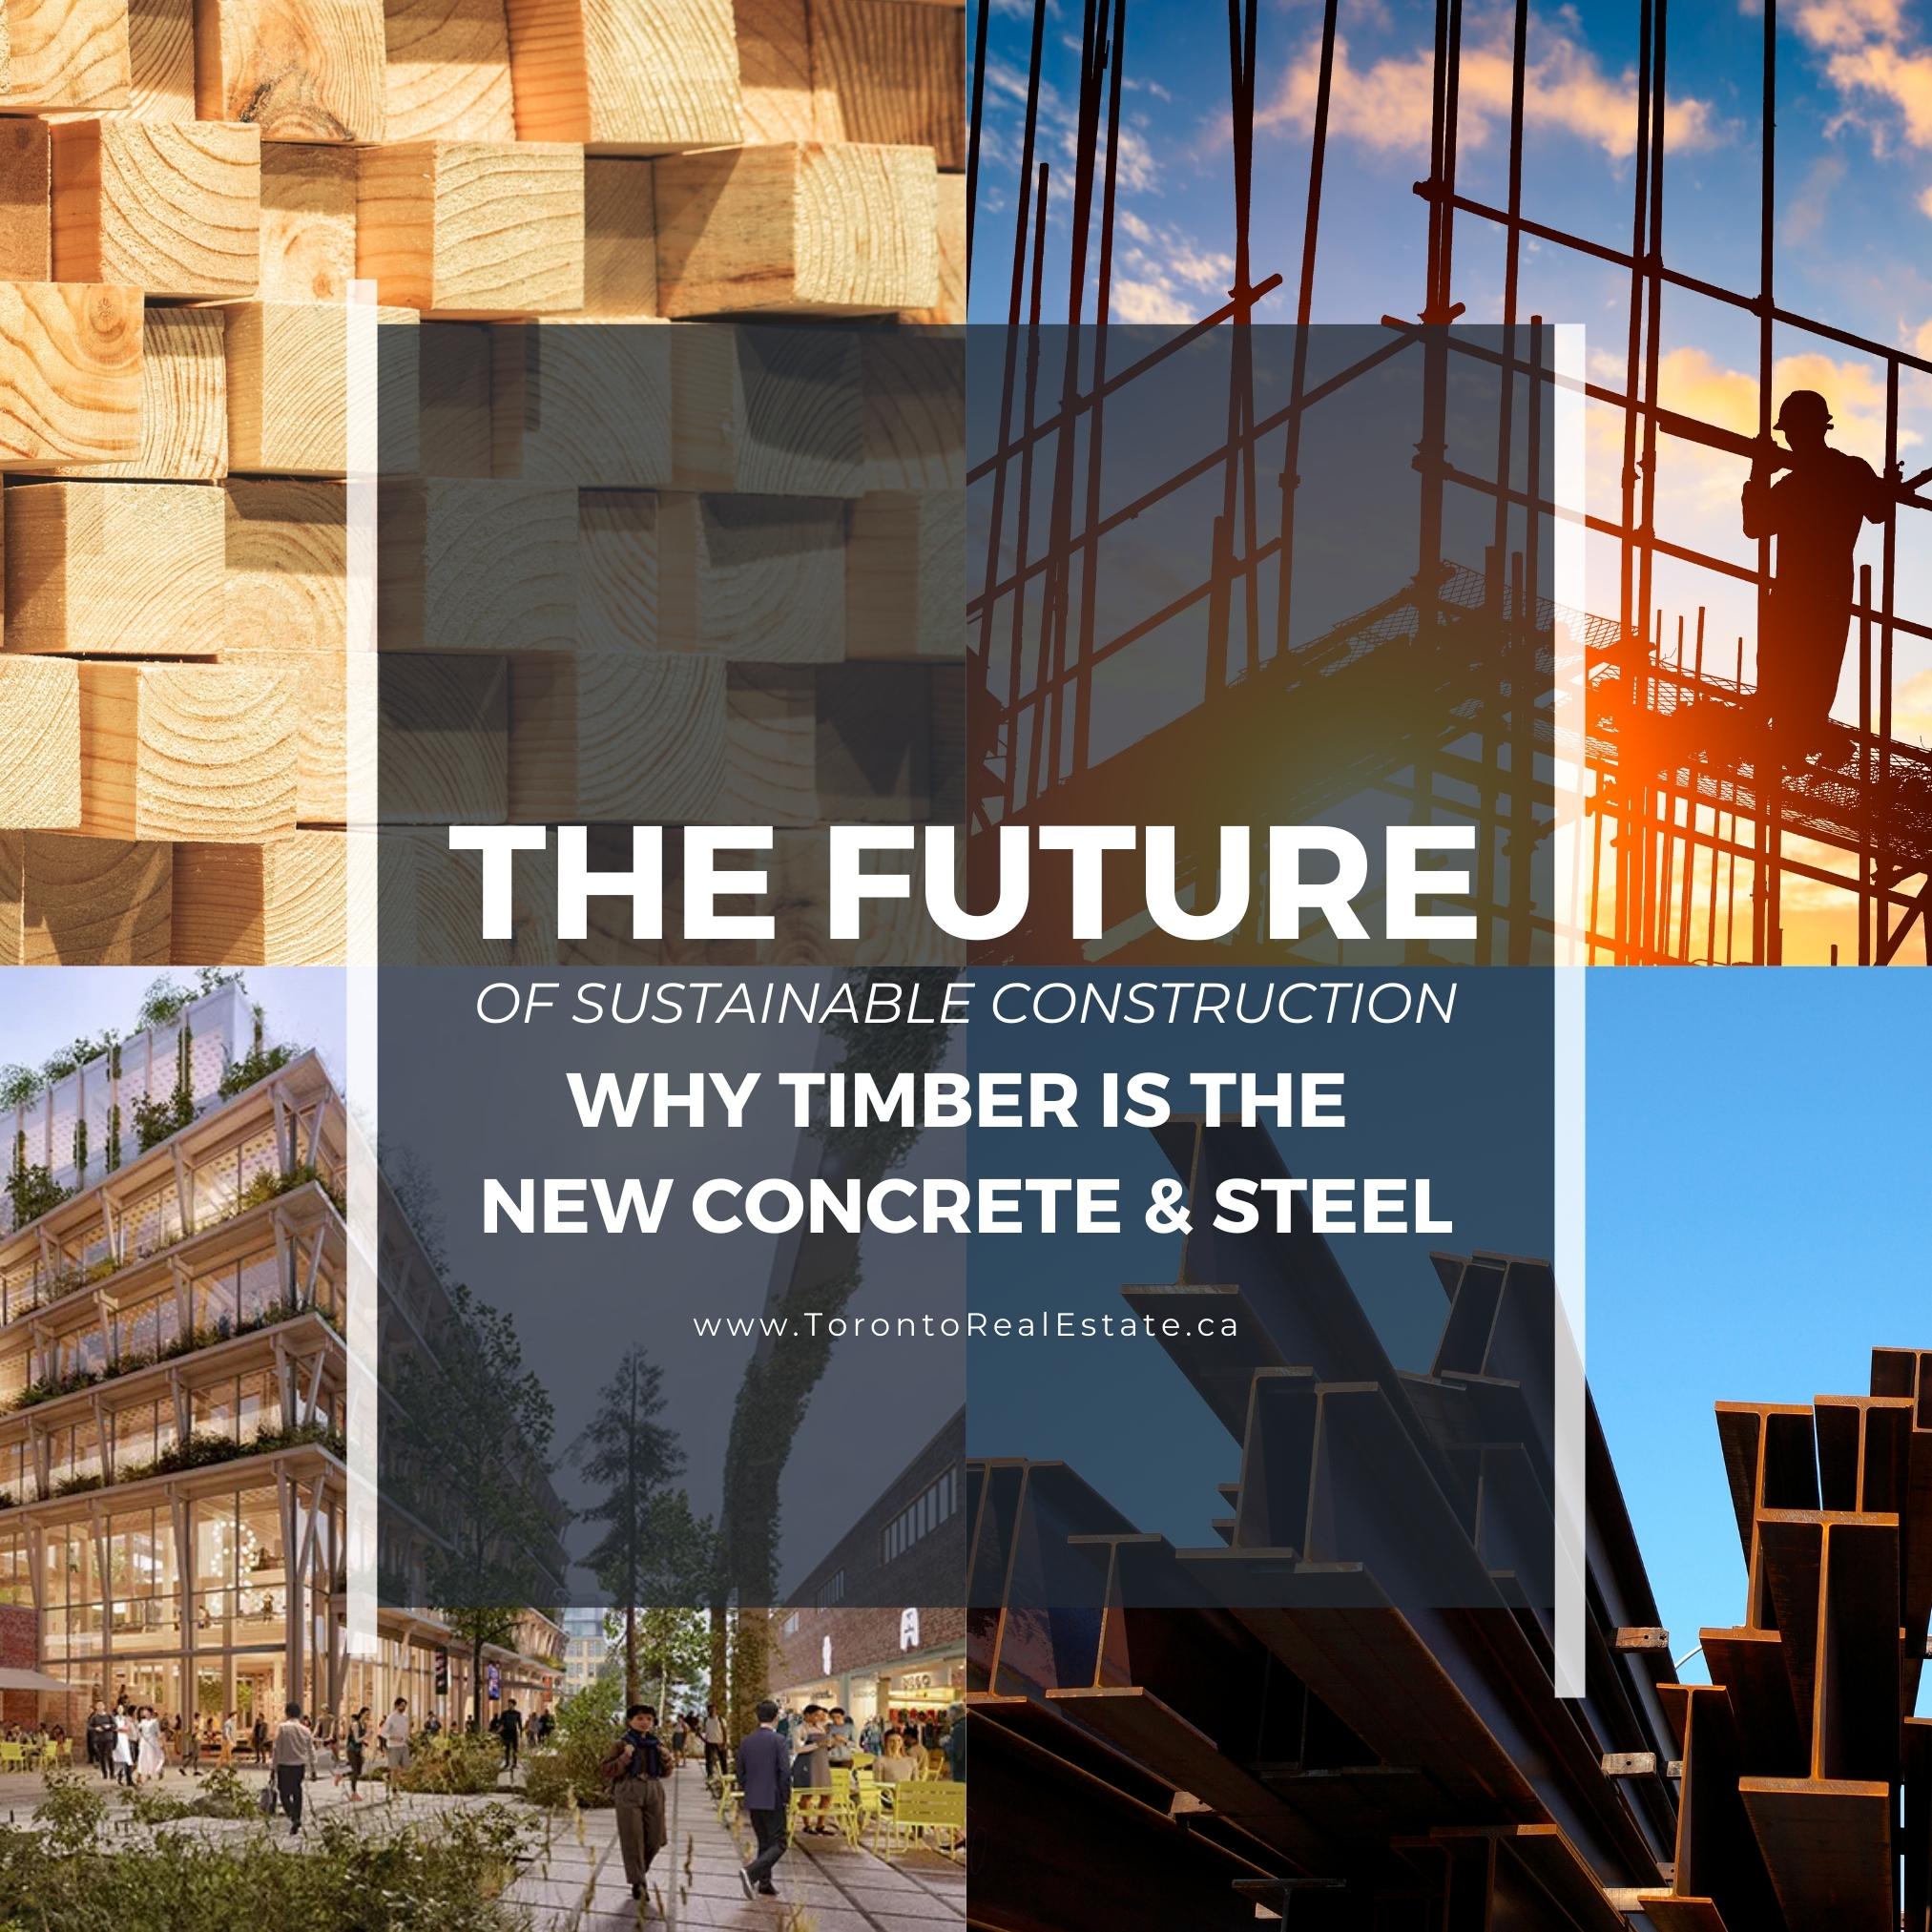 The Future of Sustainable Construction: Why Timber is the New Concrete and Steel